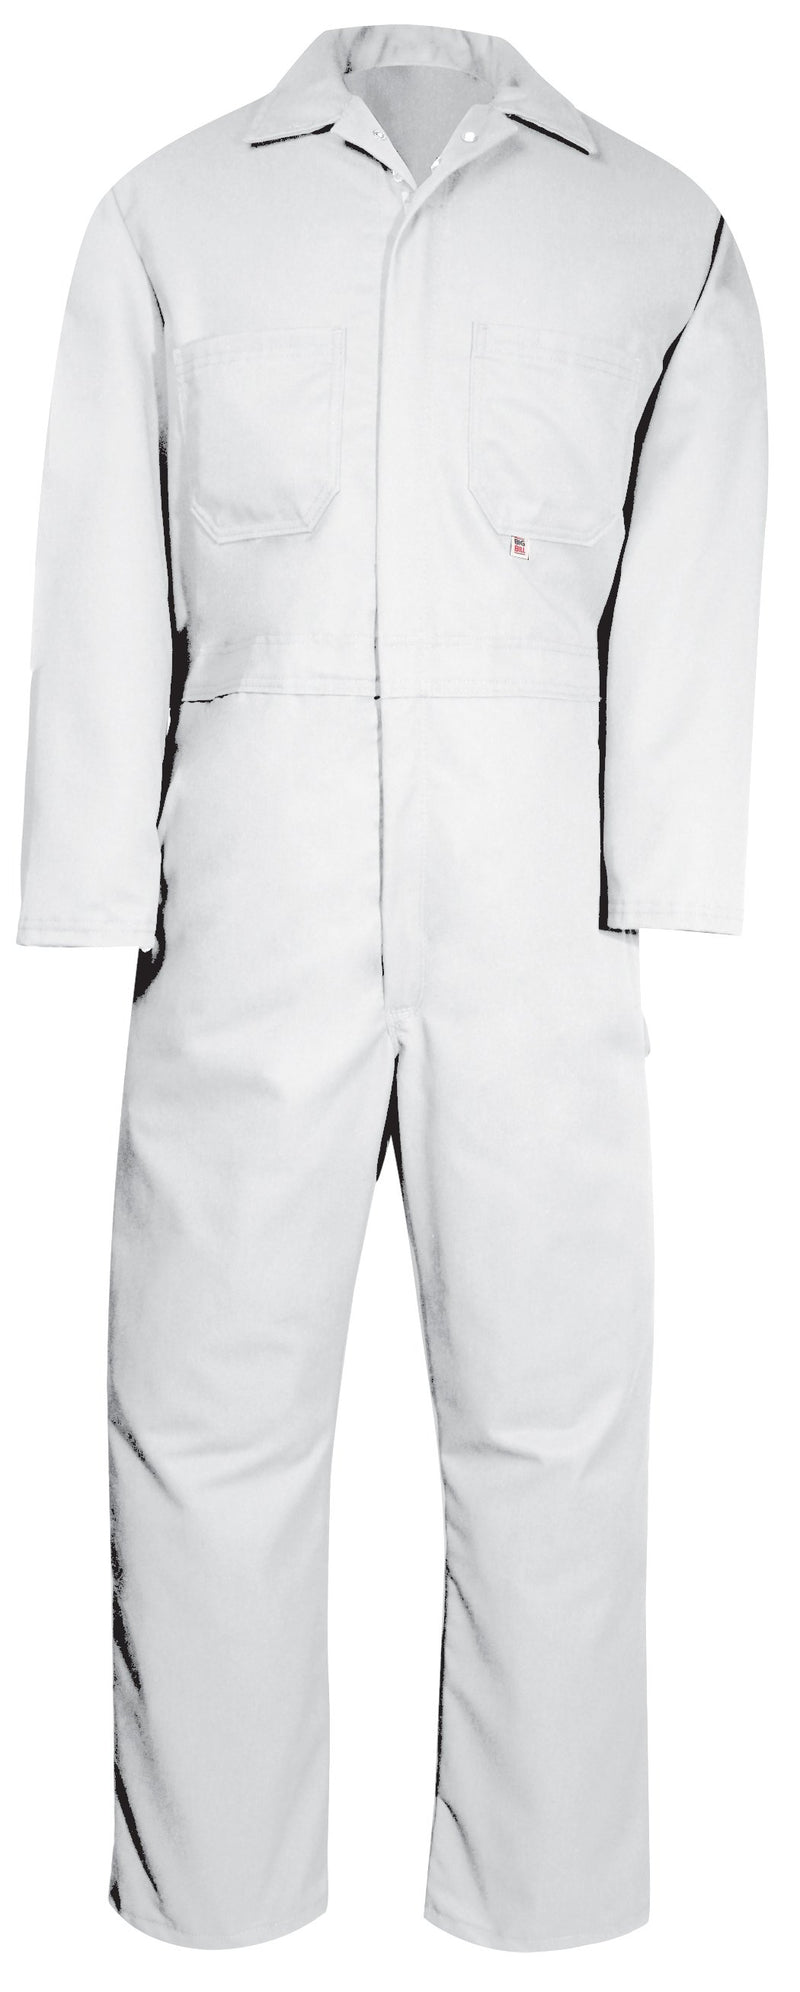 Big Bill 410 Unlined Coverall